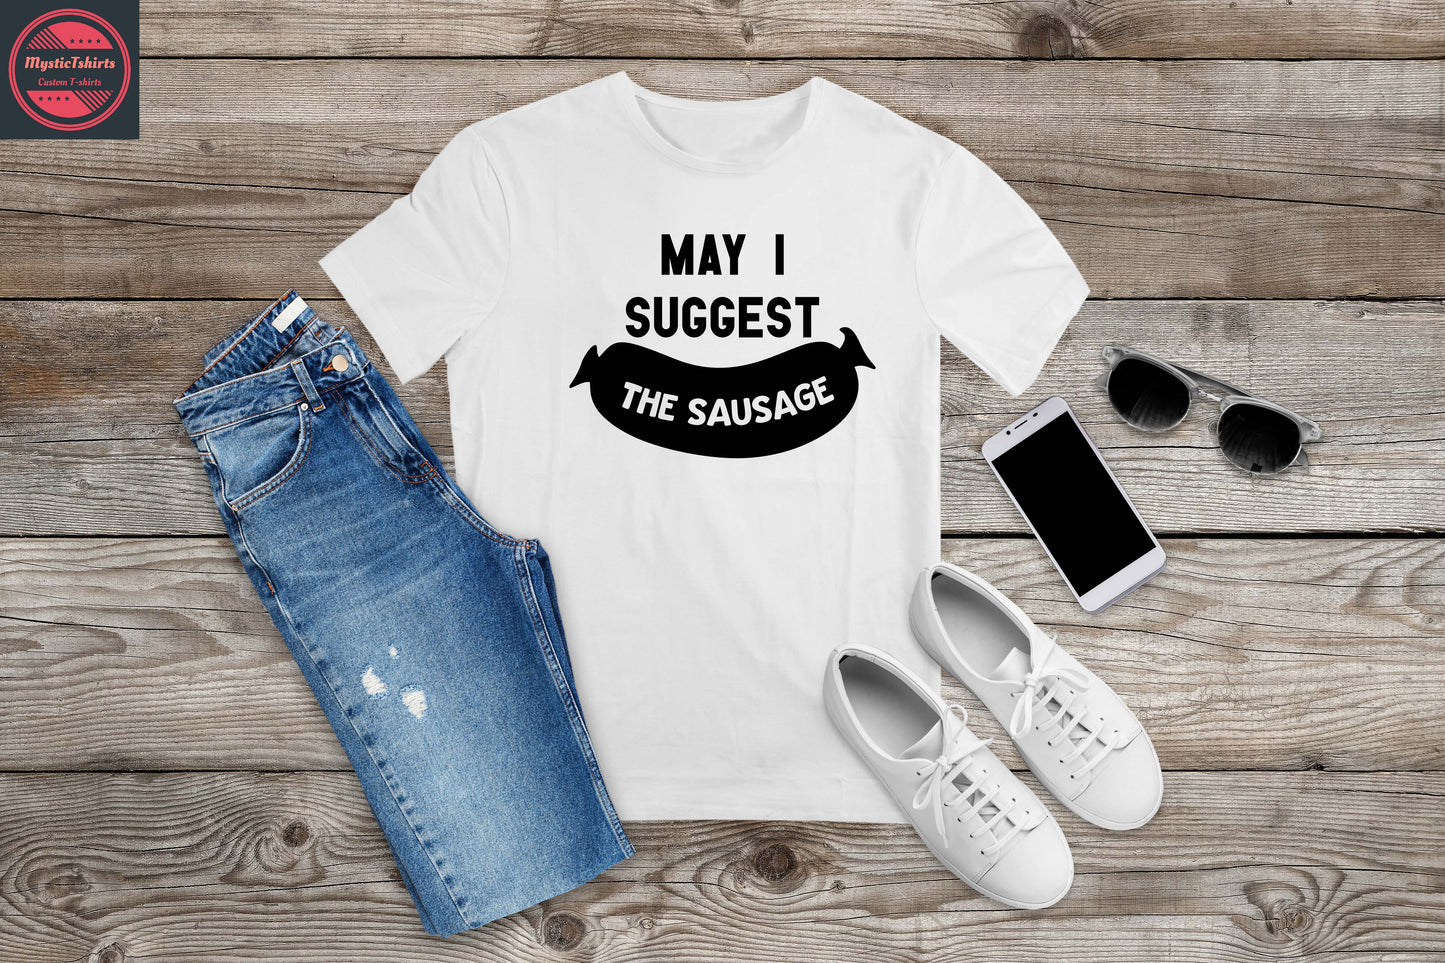 317. MAY I SUGGGEST THE SAUSAGE, Personalized T-Shirt, Custom Text, Make Your Own Shirt, Custom Tee